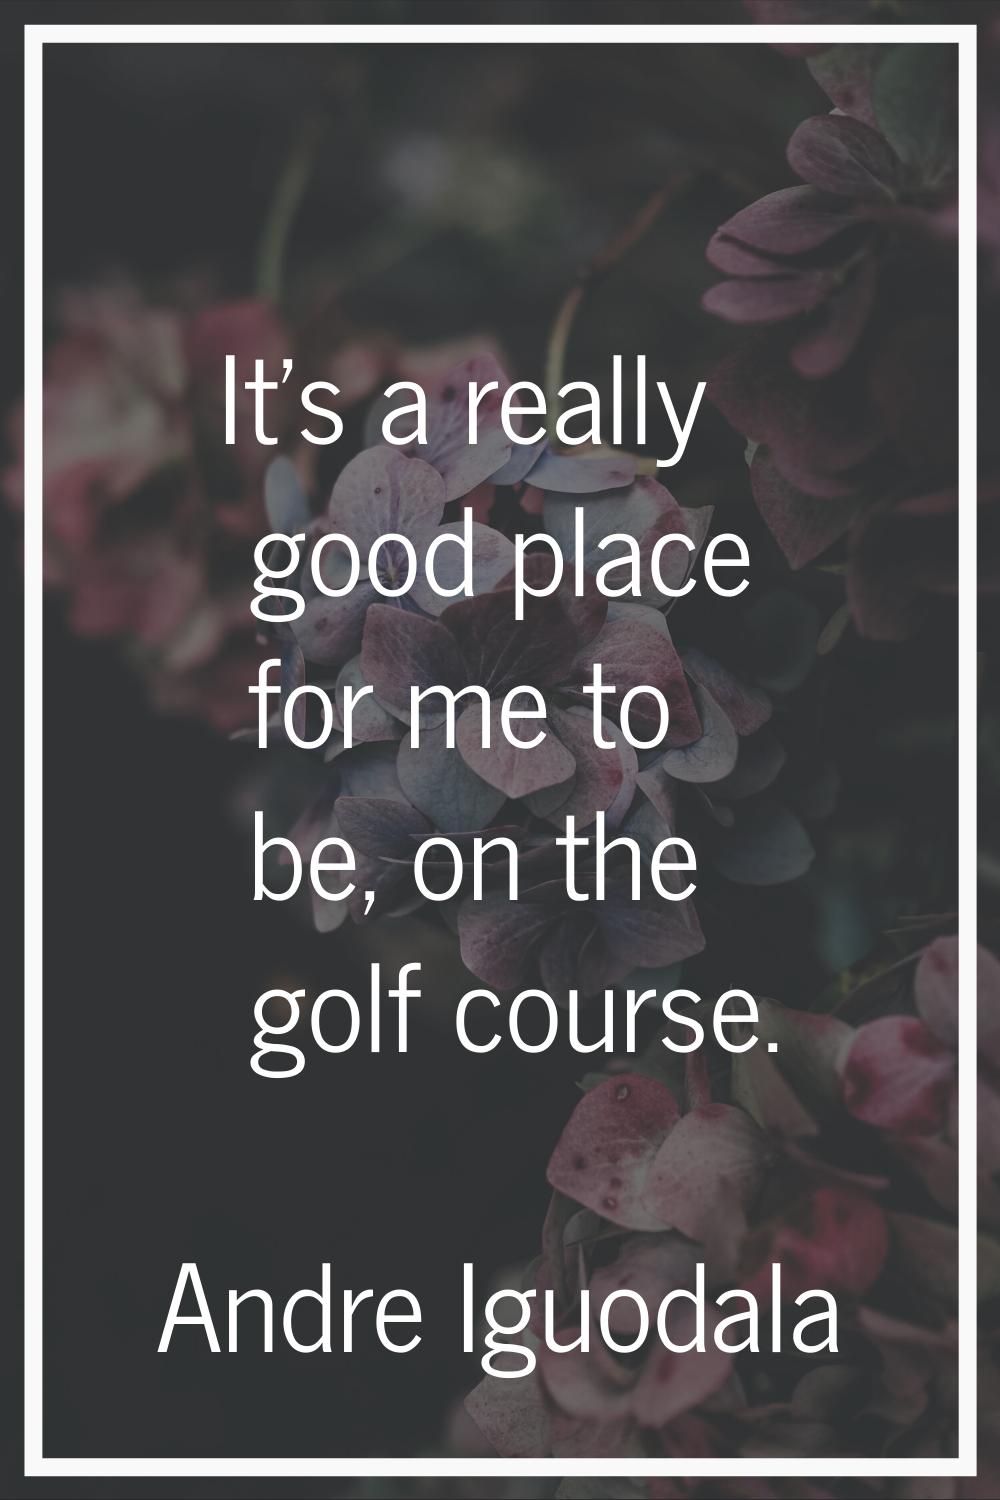 It's a really good place for me to be, on the golf course.